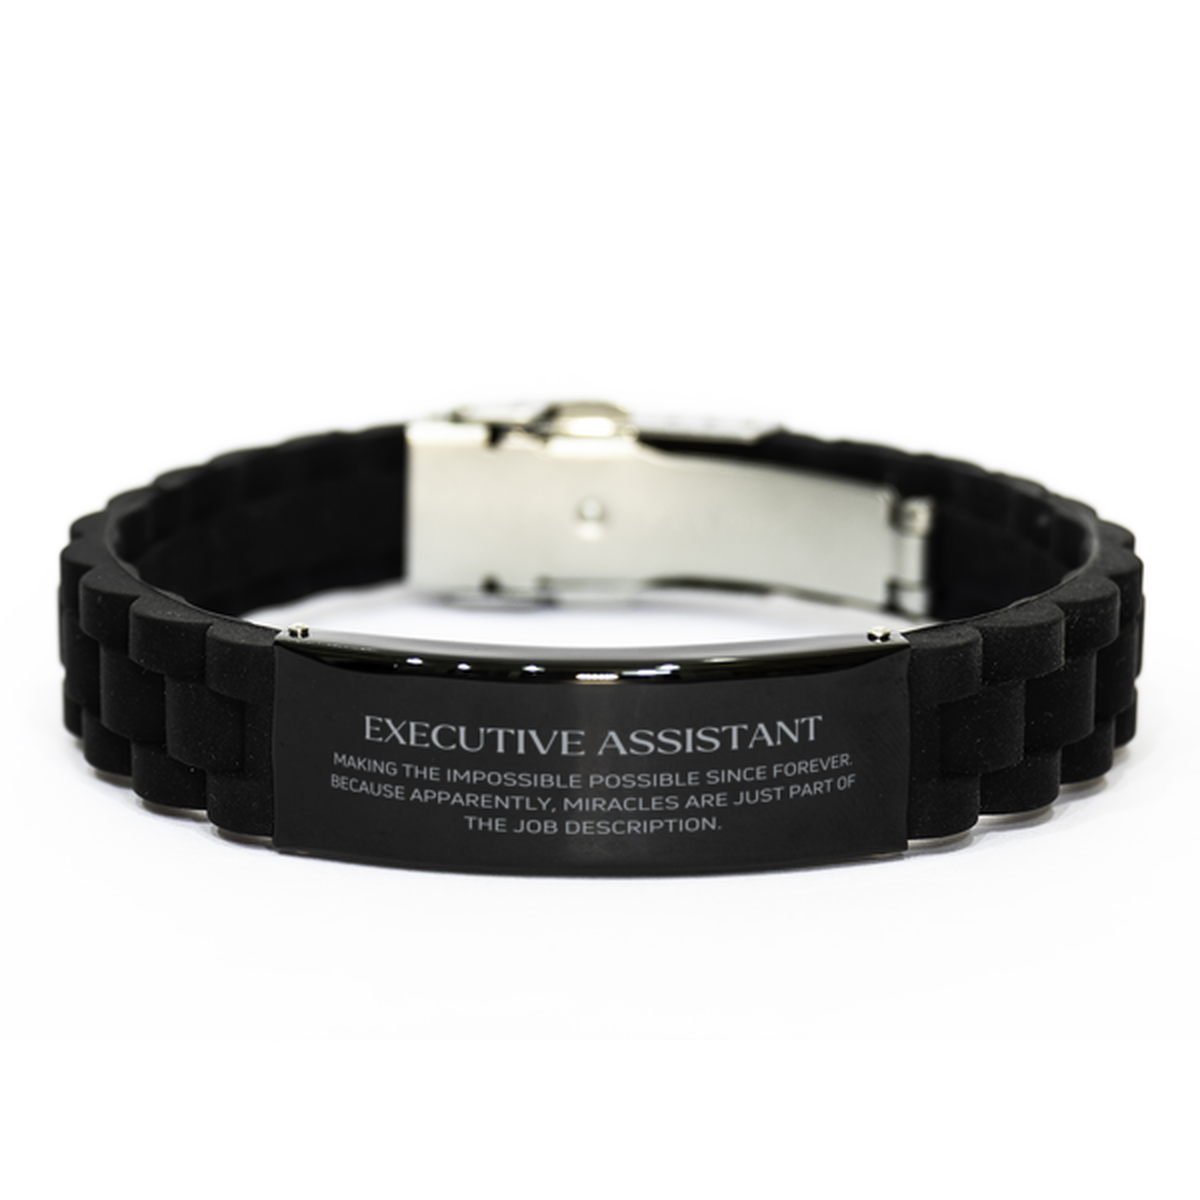 Funny Executive Assistant Gifts, Miracles are just part of the job description, Inspirational Birthday Black Glidelock Clasp Bracelet For Executive Assistant, Men, Women, Coworkers, Friends, Boss